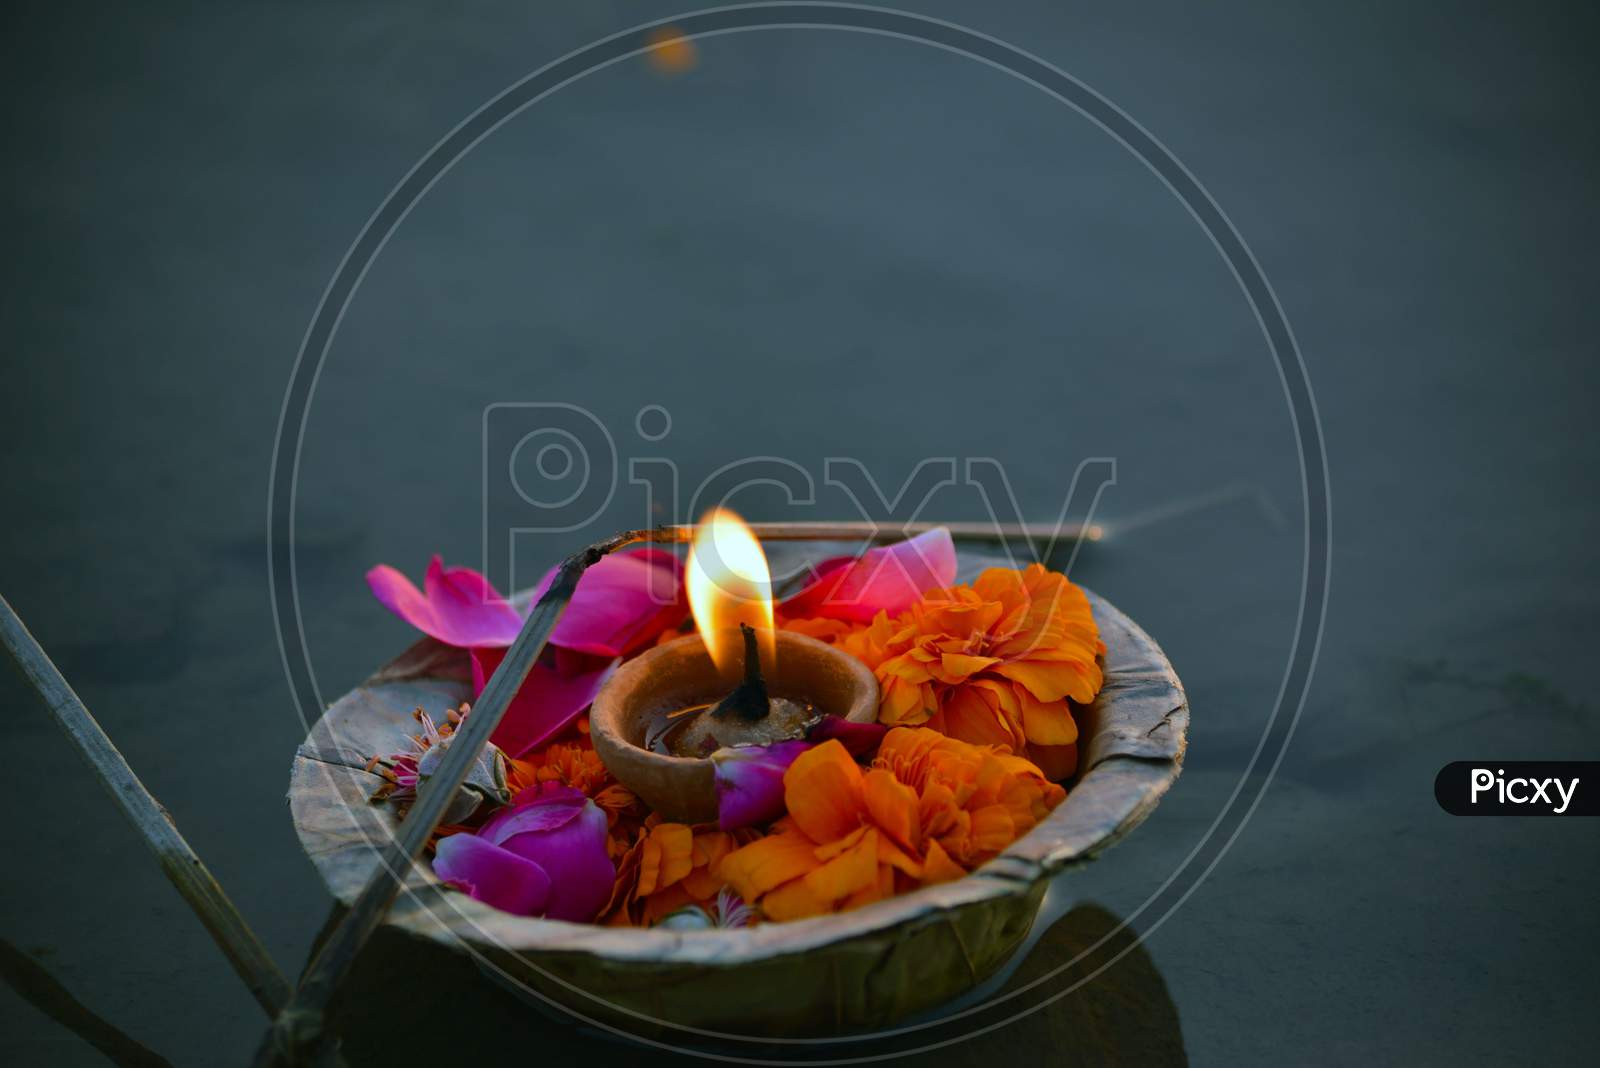 clay lamp and flowers in water rituals of Indian culture